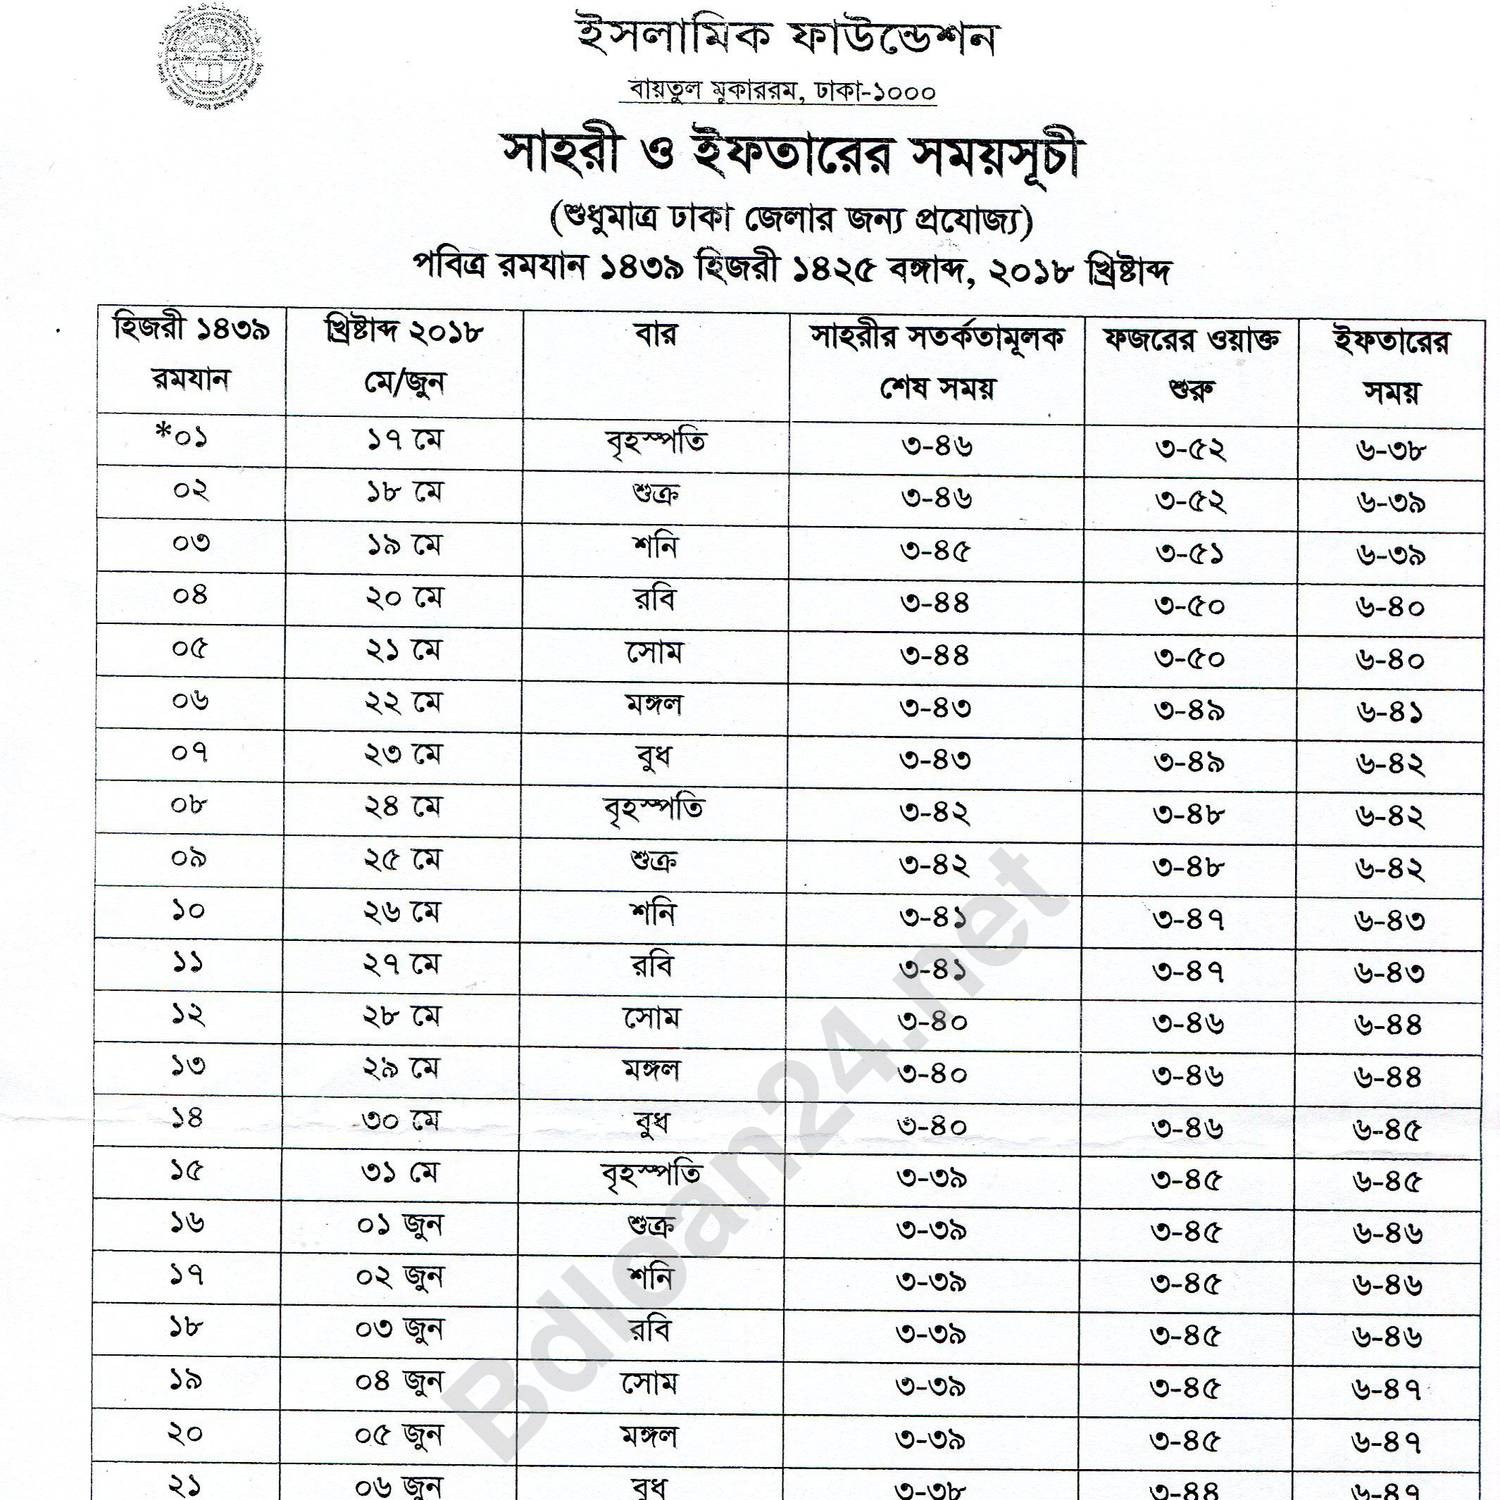 Sehri & Iftar Time schedule.pdf DocDroid